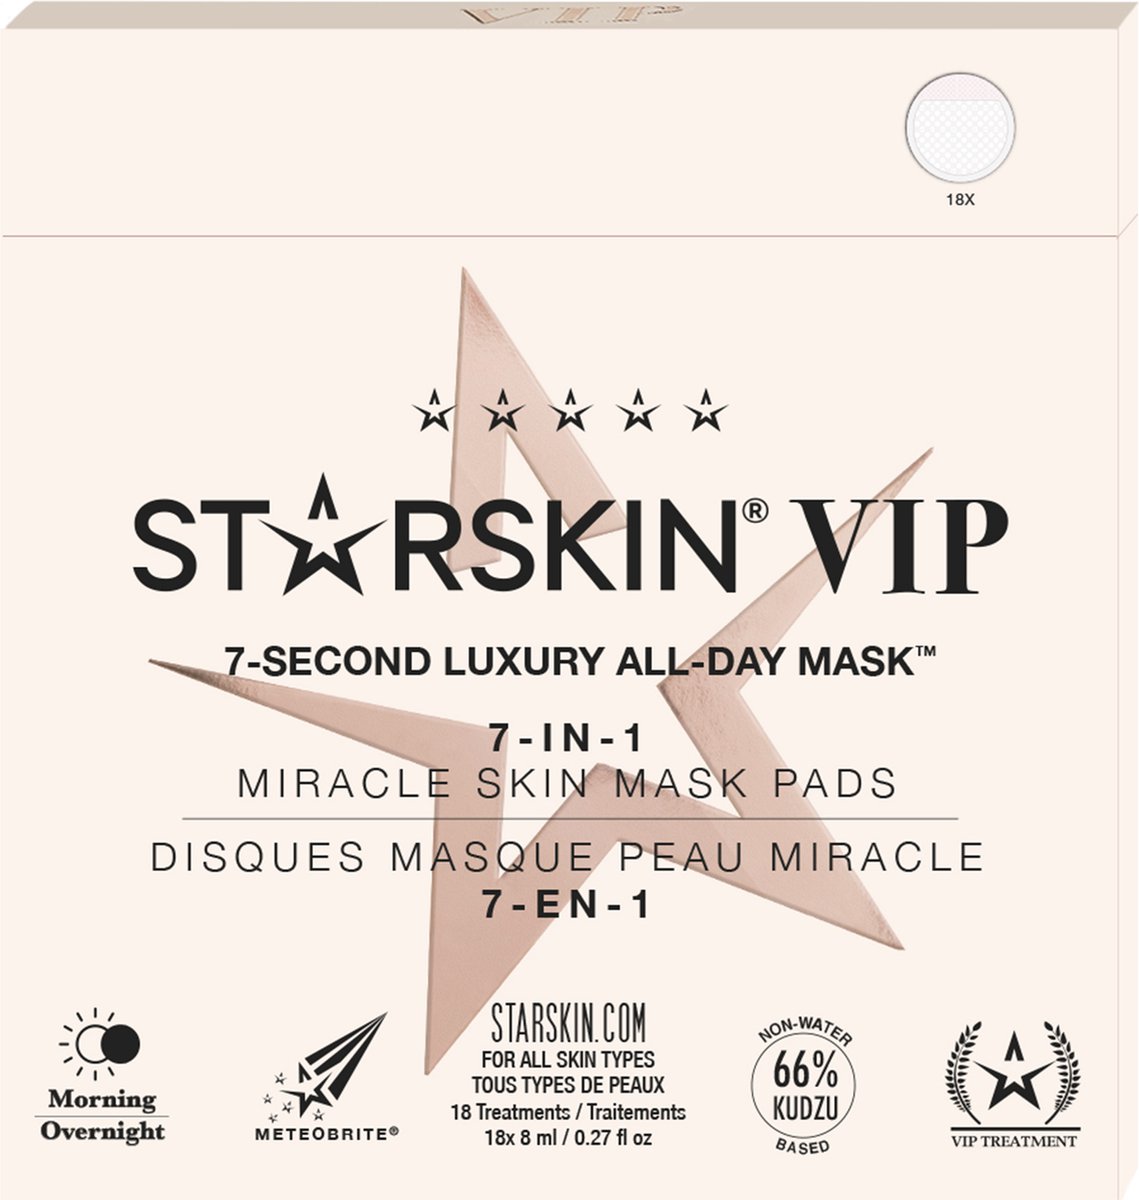 Starskin VIP 7-Second Luxury All-Day Mask™ - 18 Pack